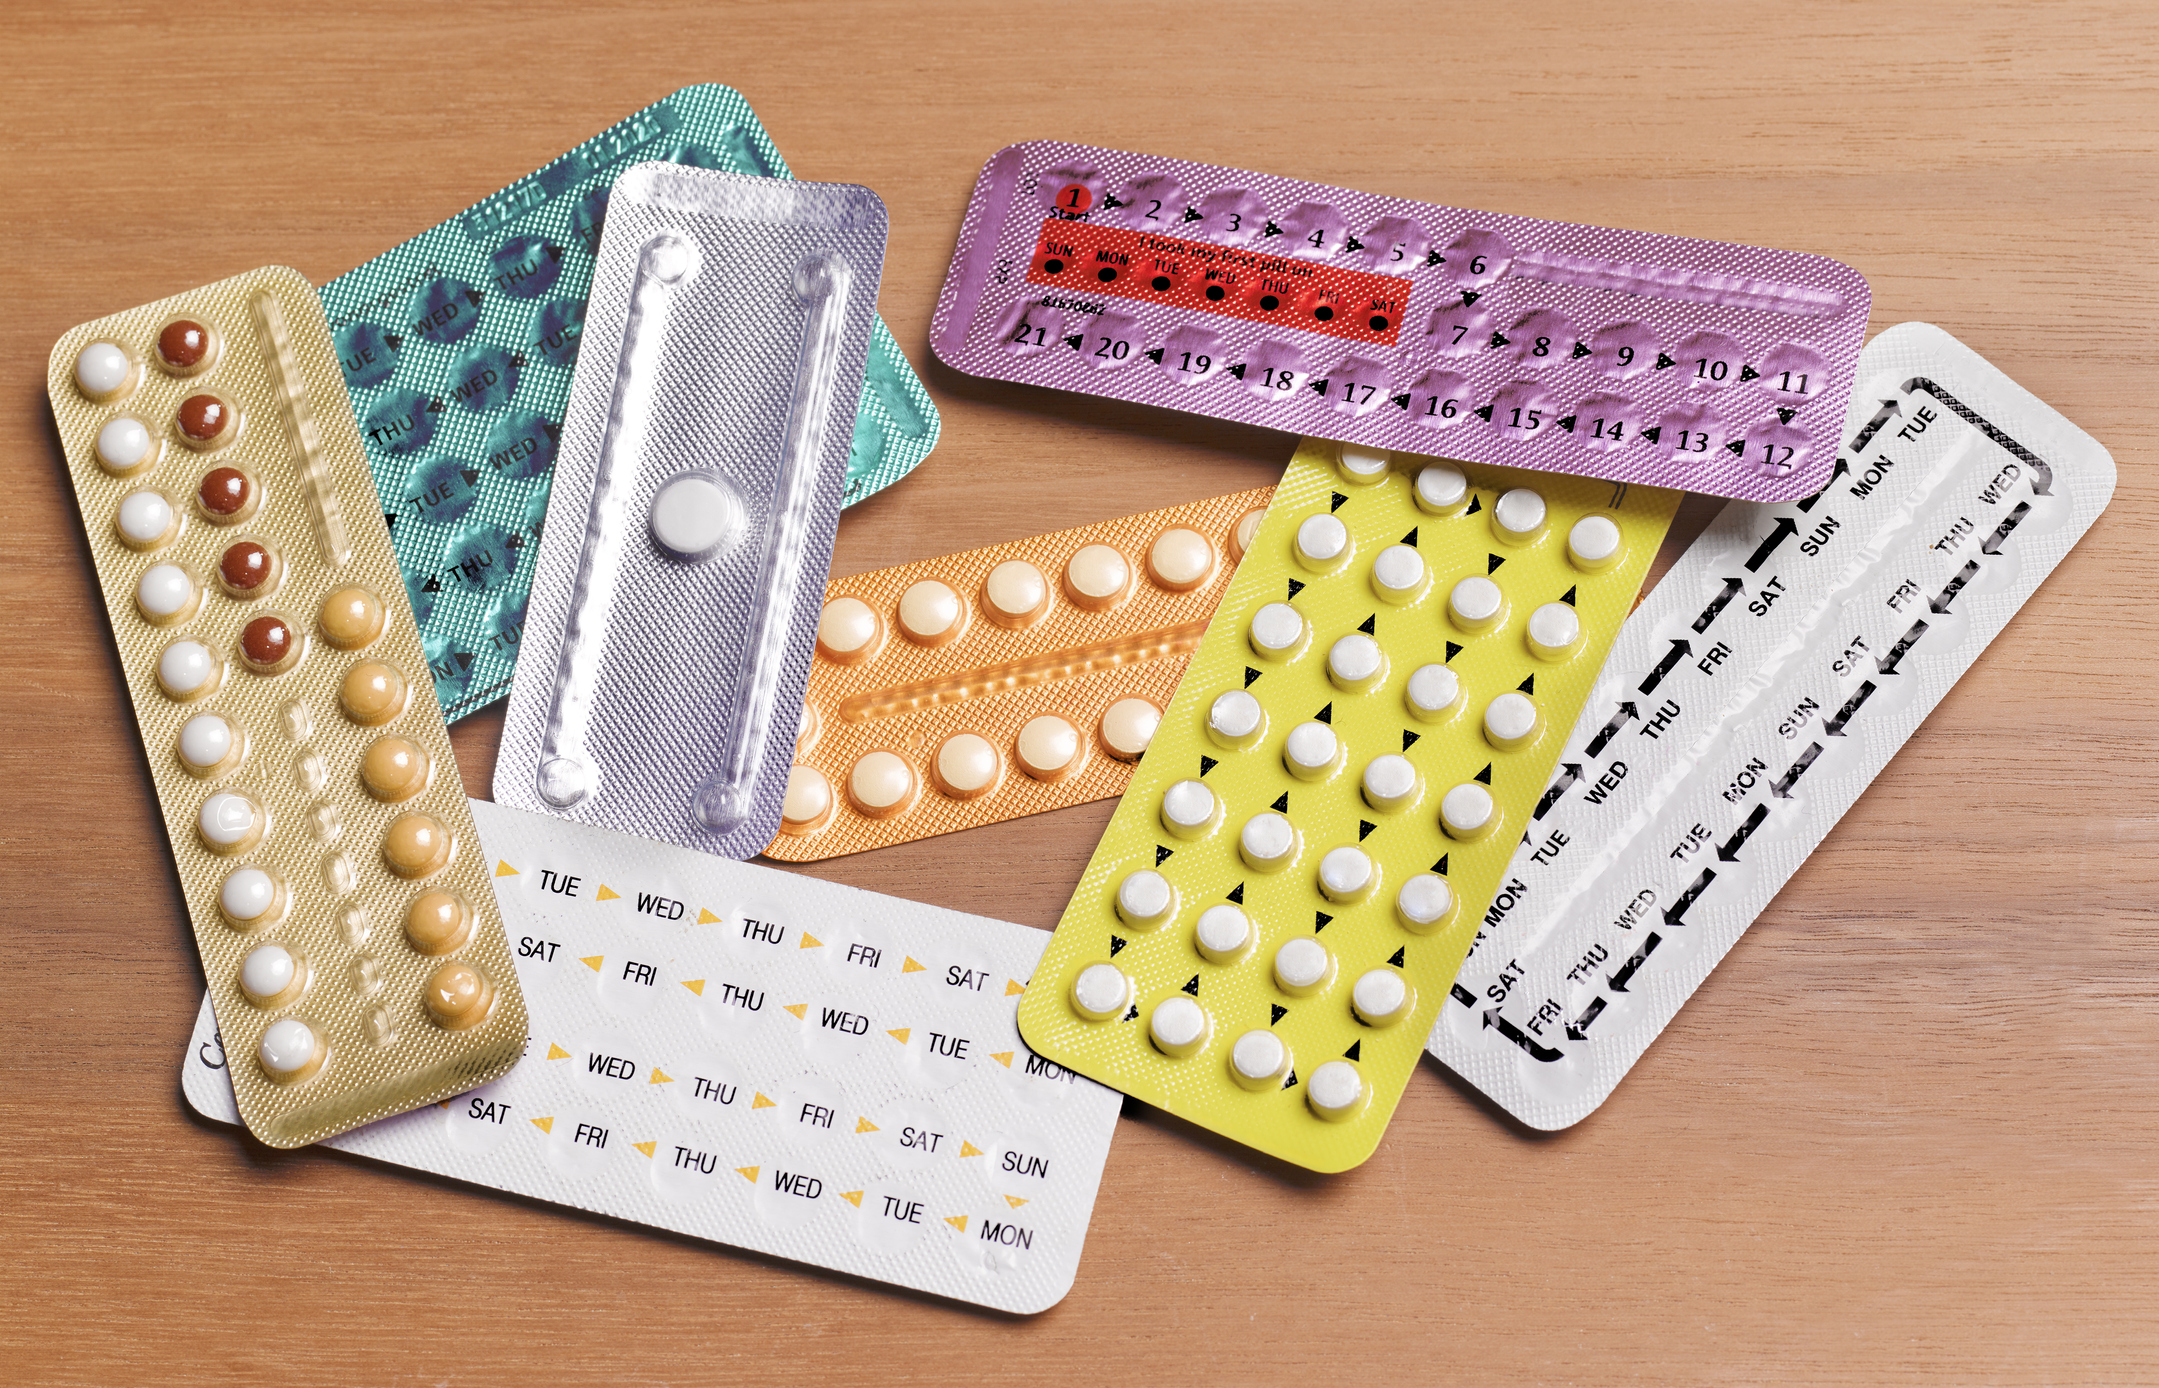 Certain Birth Control Pills Increase Risk Of Breast Cancer By Up To 30%, University Of Oxford Researchers Find